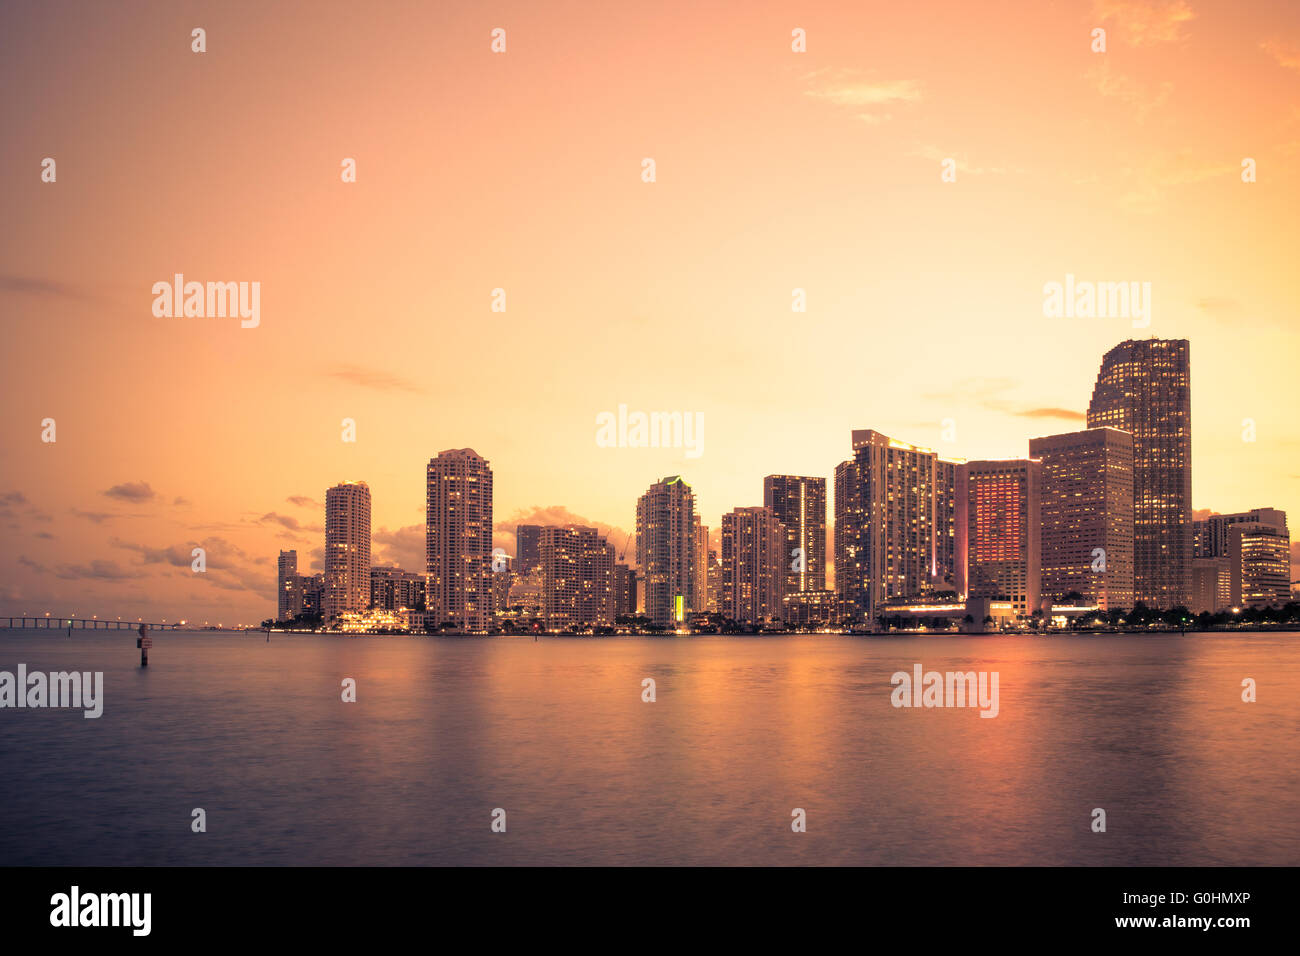 Floride Miami skyline at sunset Banque D'Images